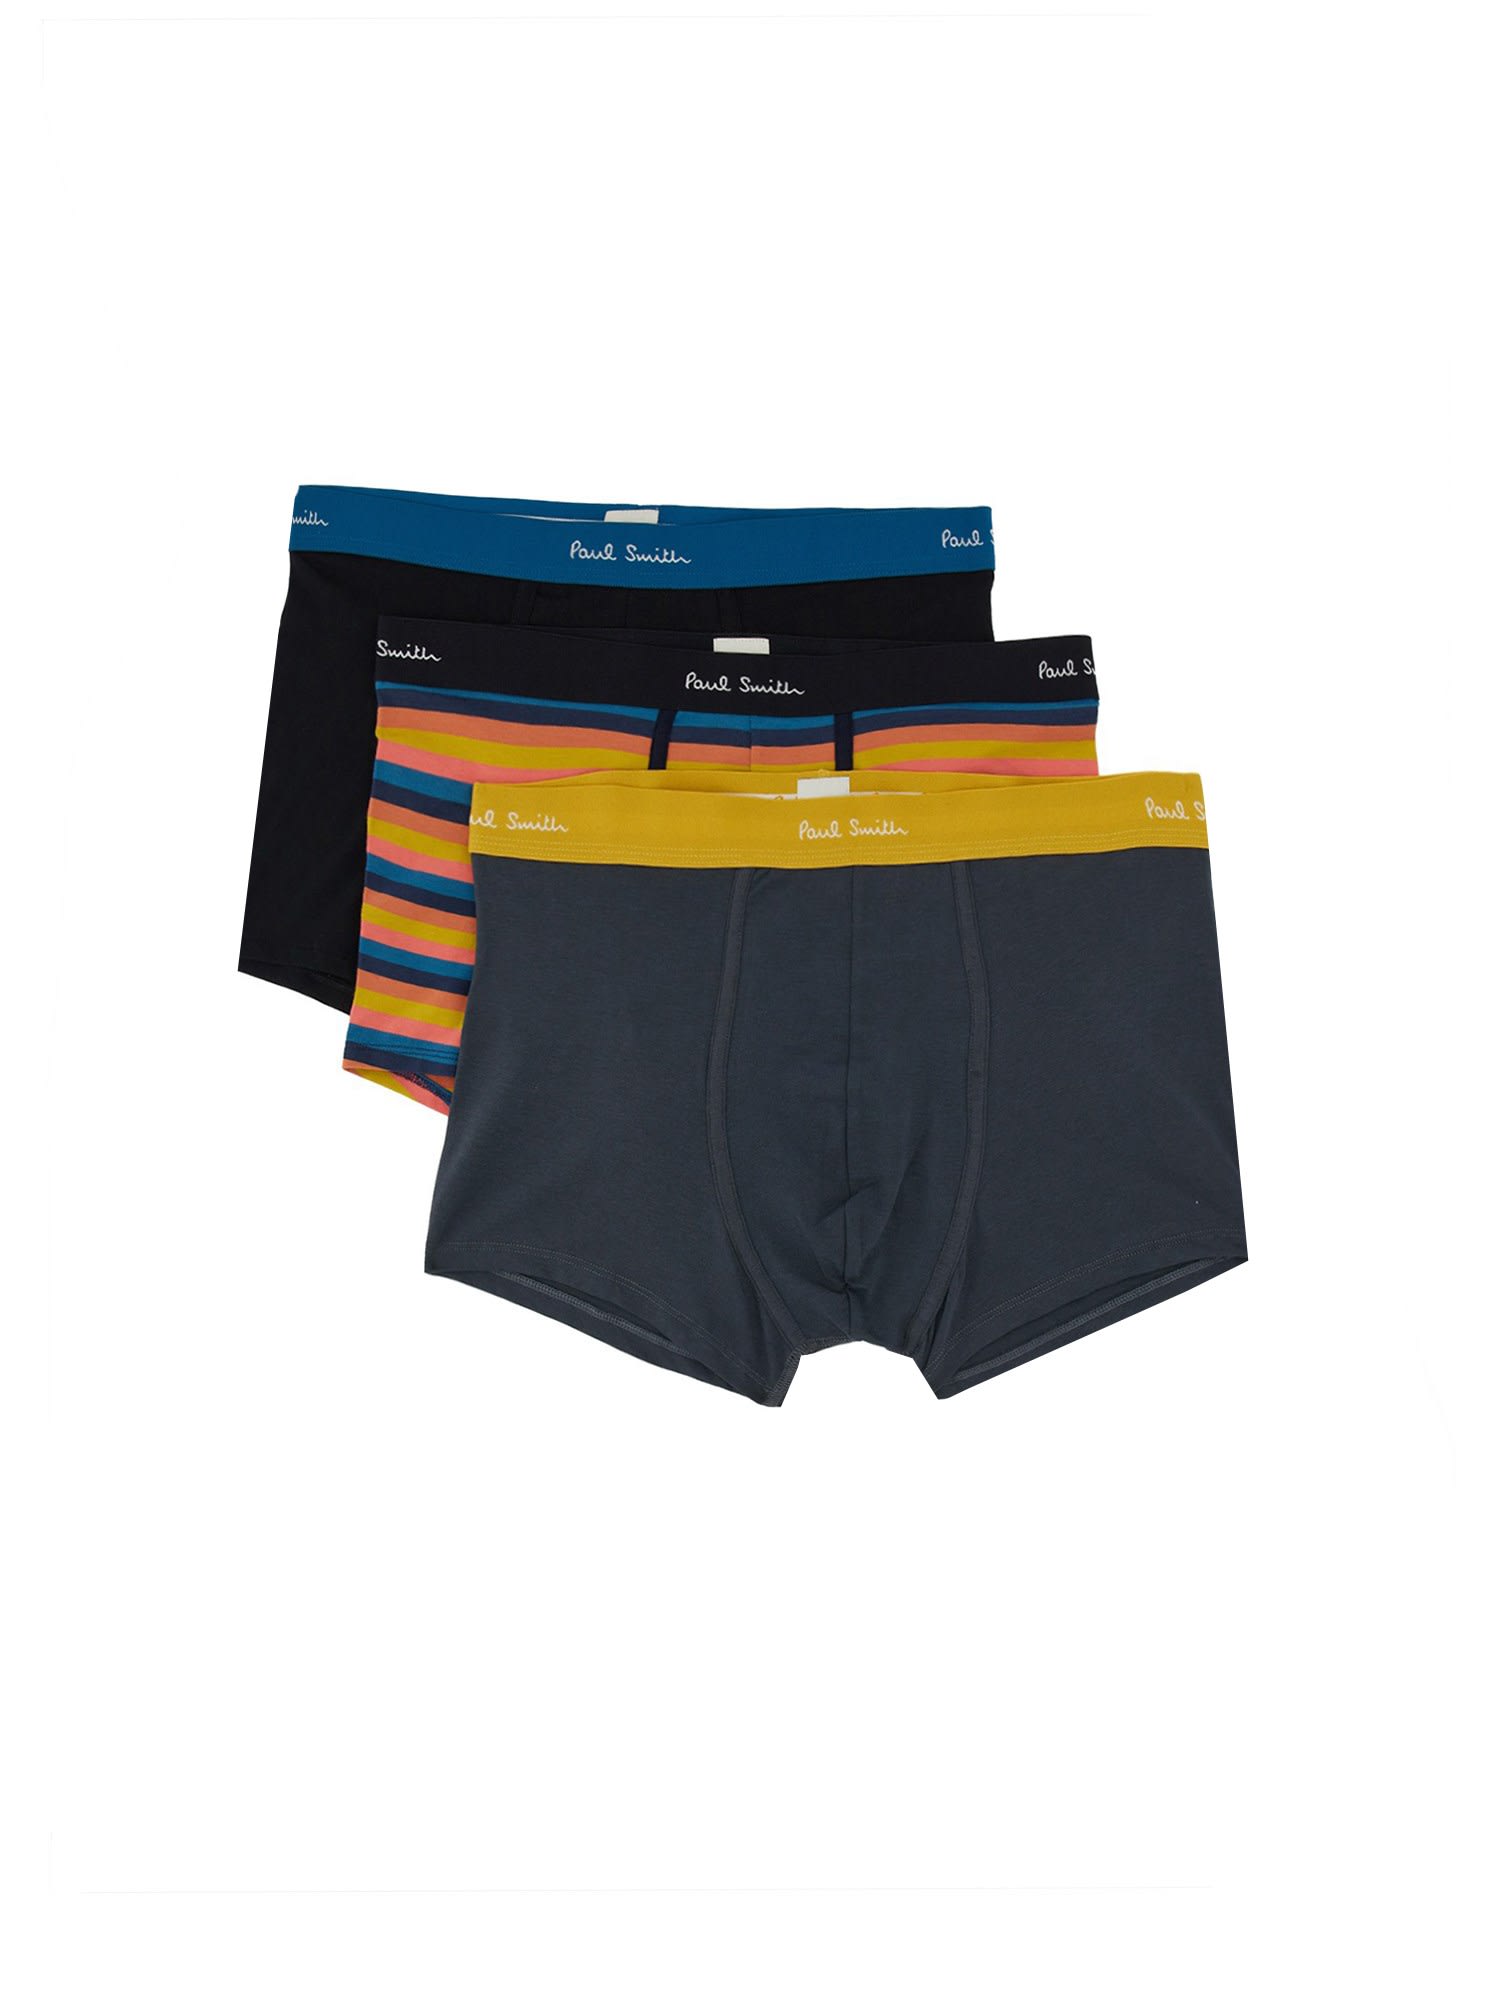 PAUL SMITH CONFECTION OF THREE BOXER SHORTS